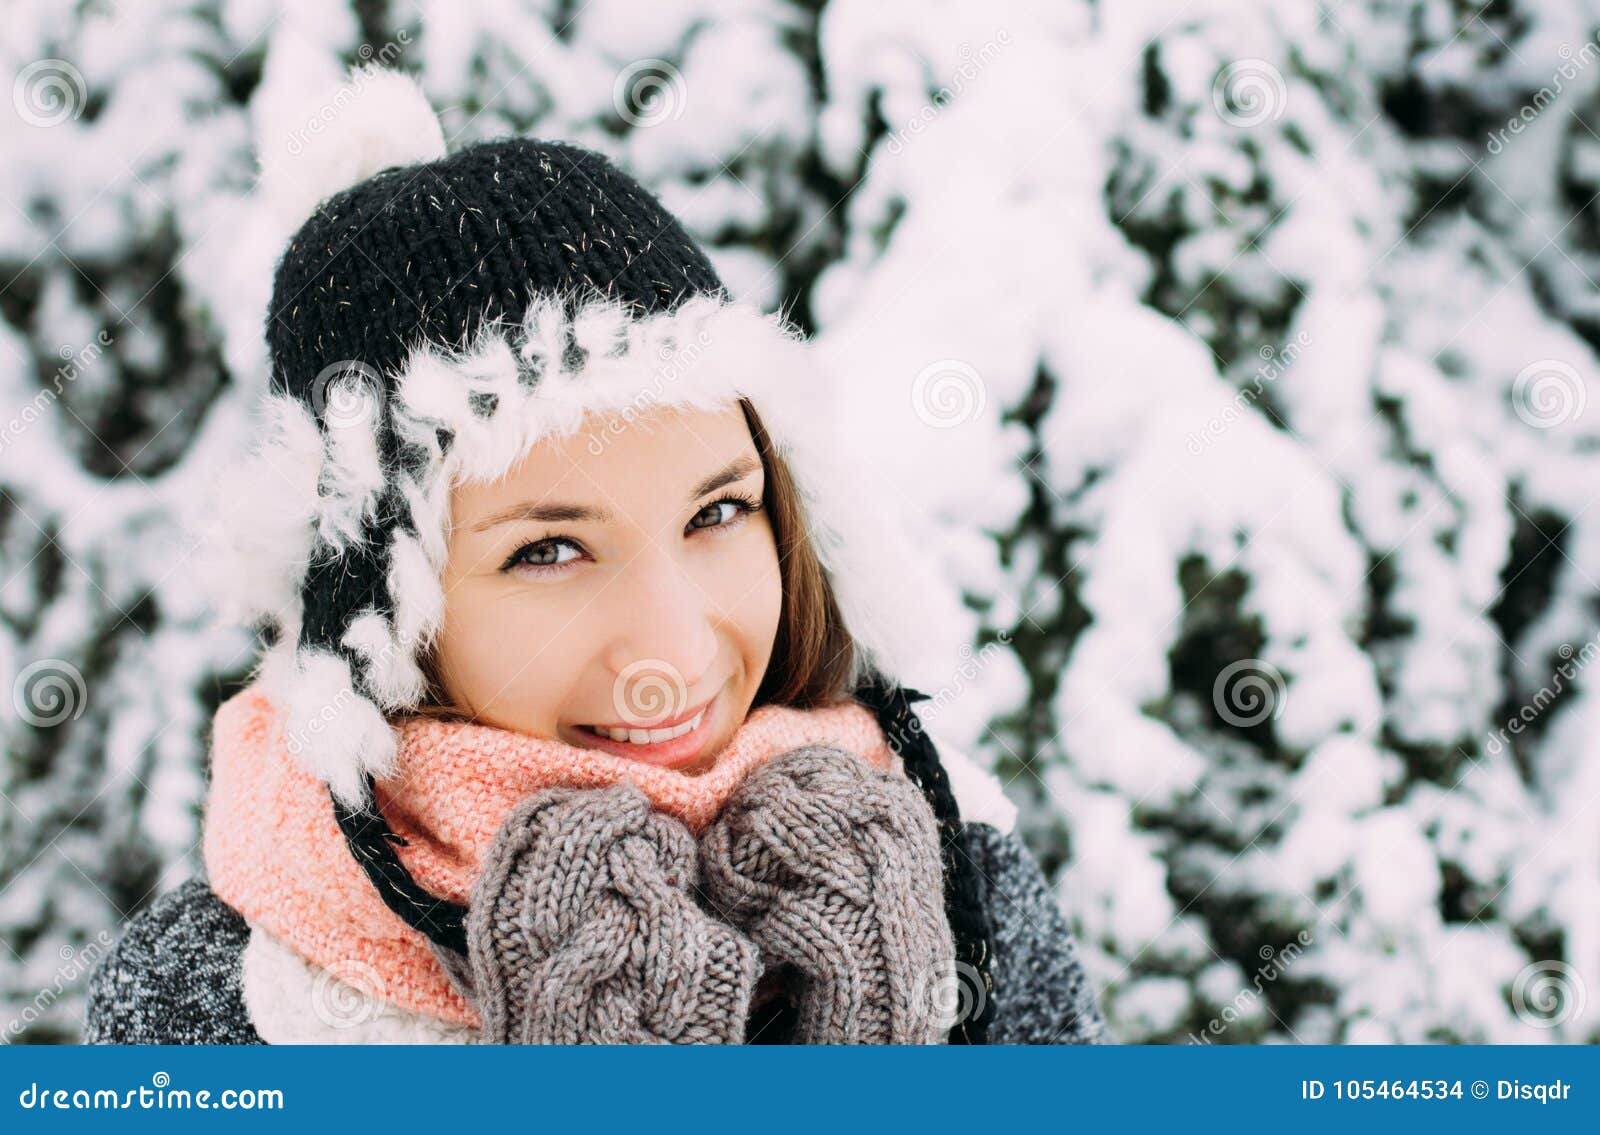 Beautiful Young Woman Portrait on Winter Forest Stock Photo - Image of ...